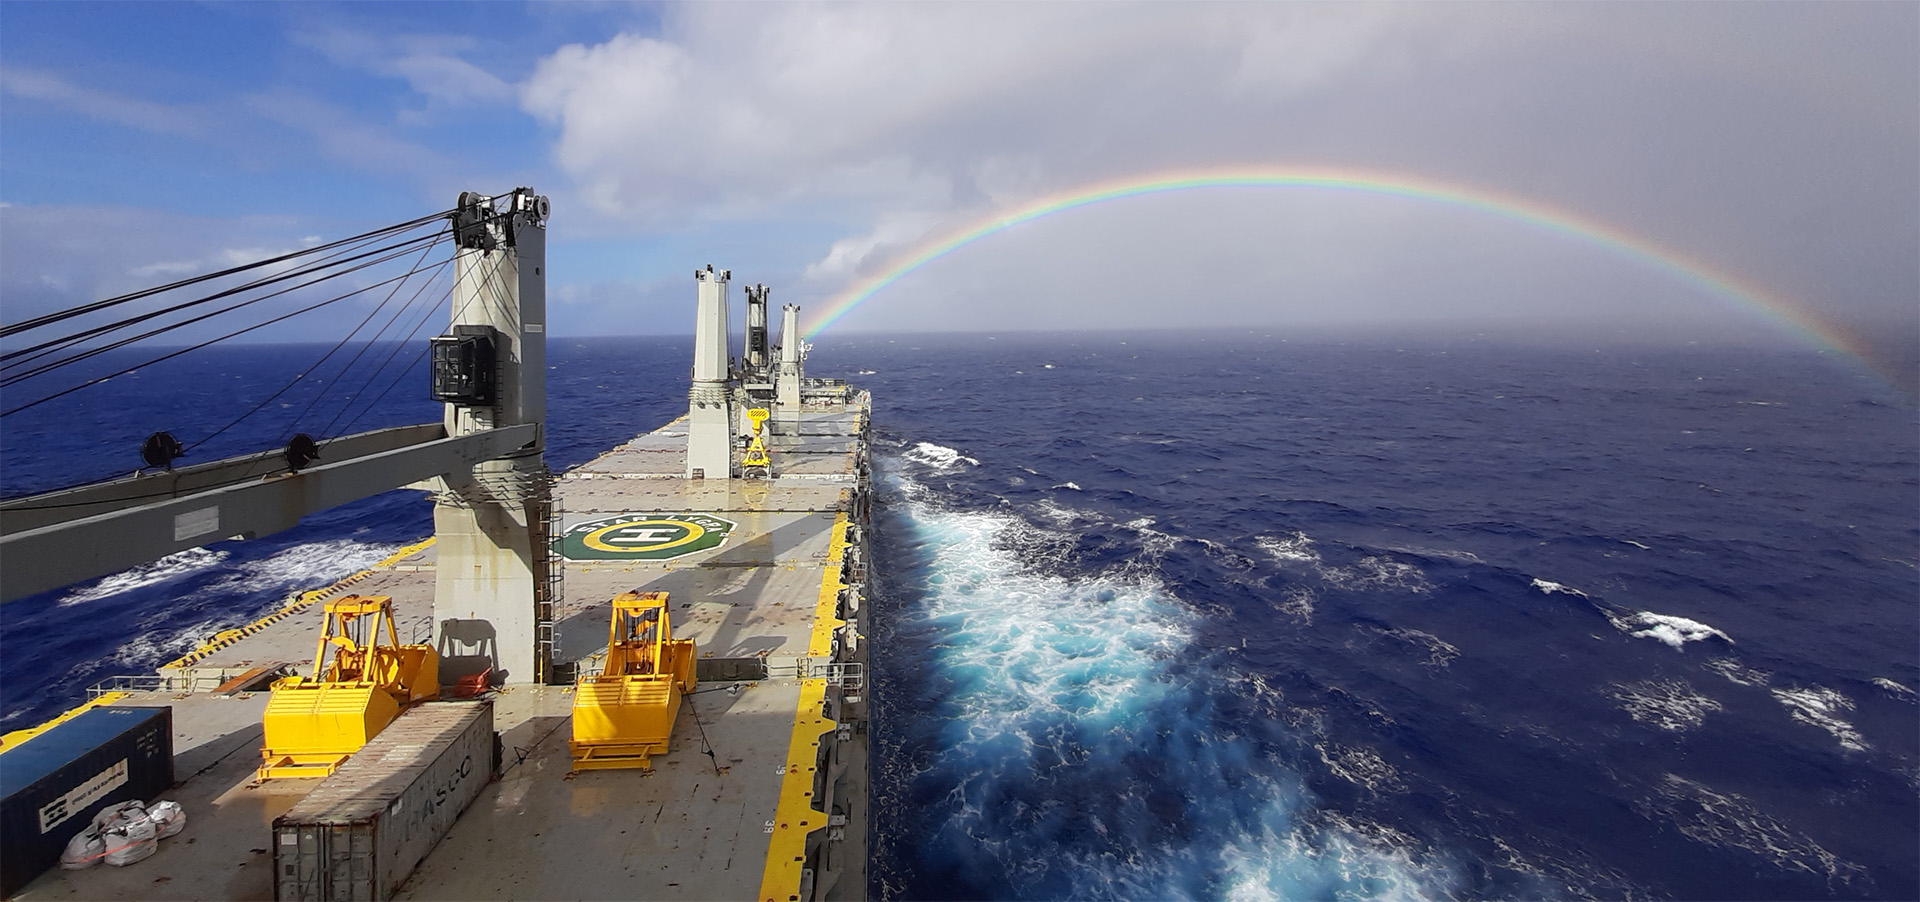 Ship in rough seas and rainbow